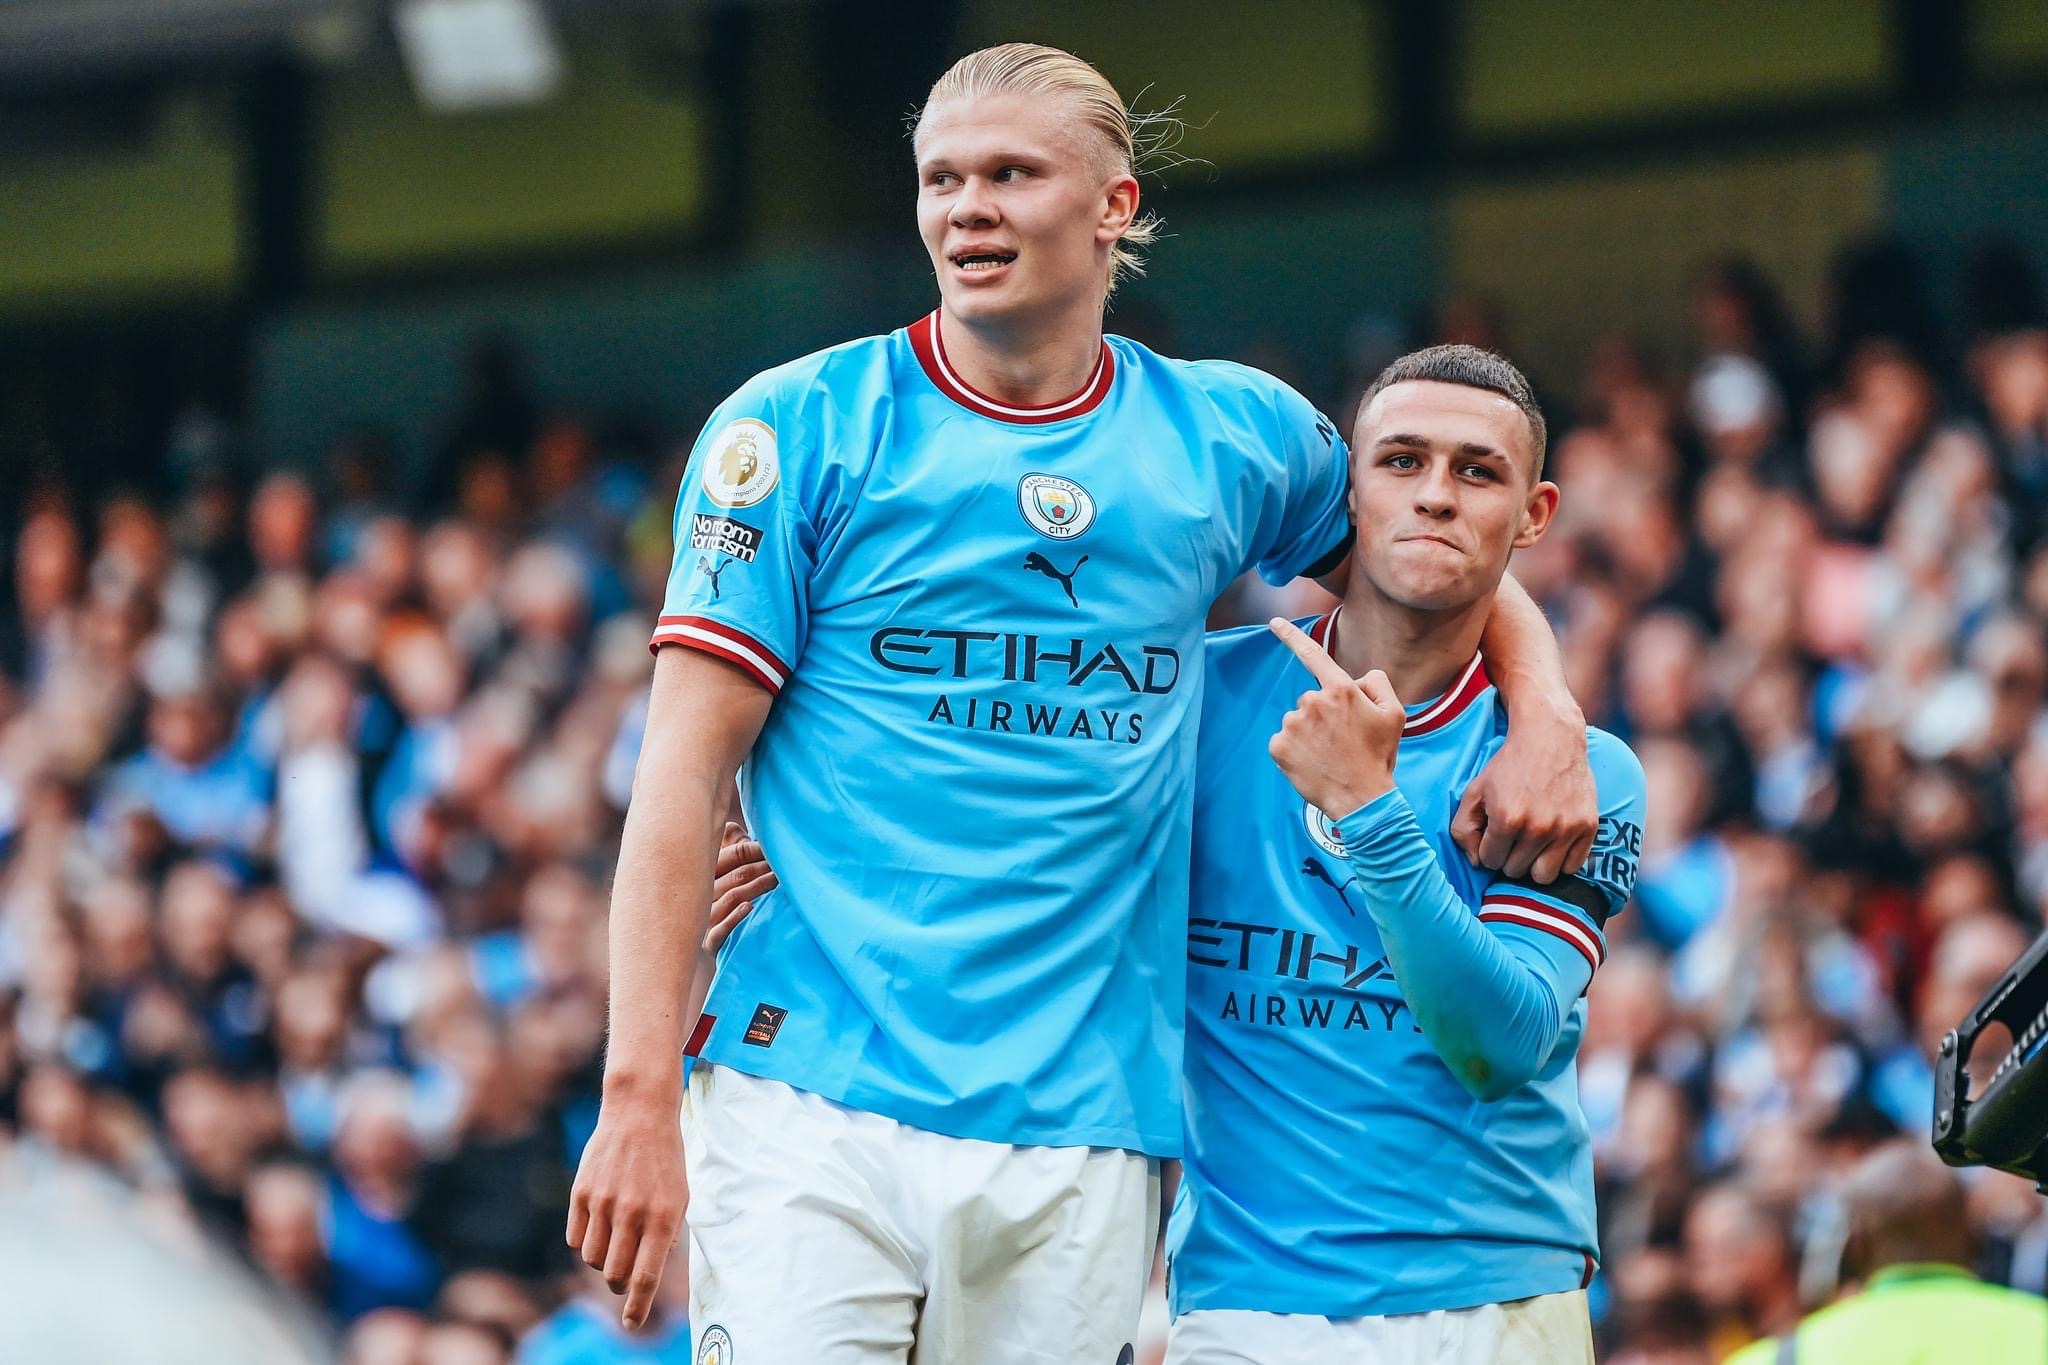 Erling Haaland and Phil Foden both scored hat-tricks as Manchester City beat sworn rivals Manchester United 6-3 on Sunday.